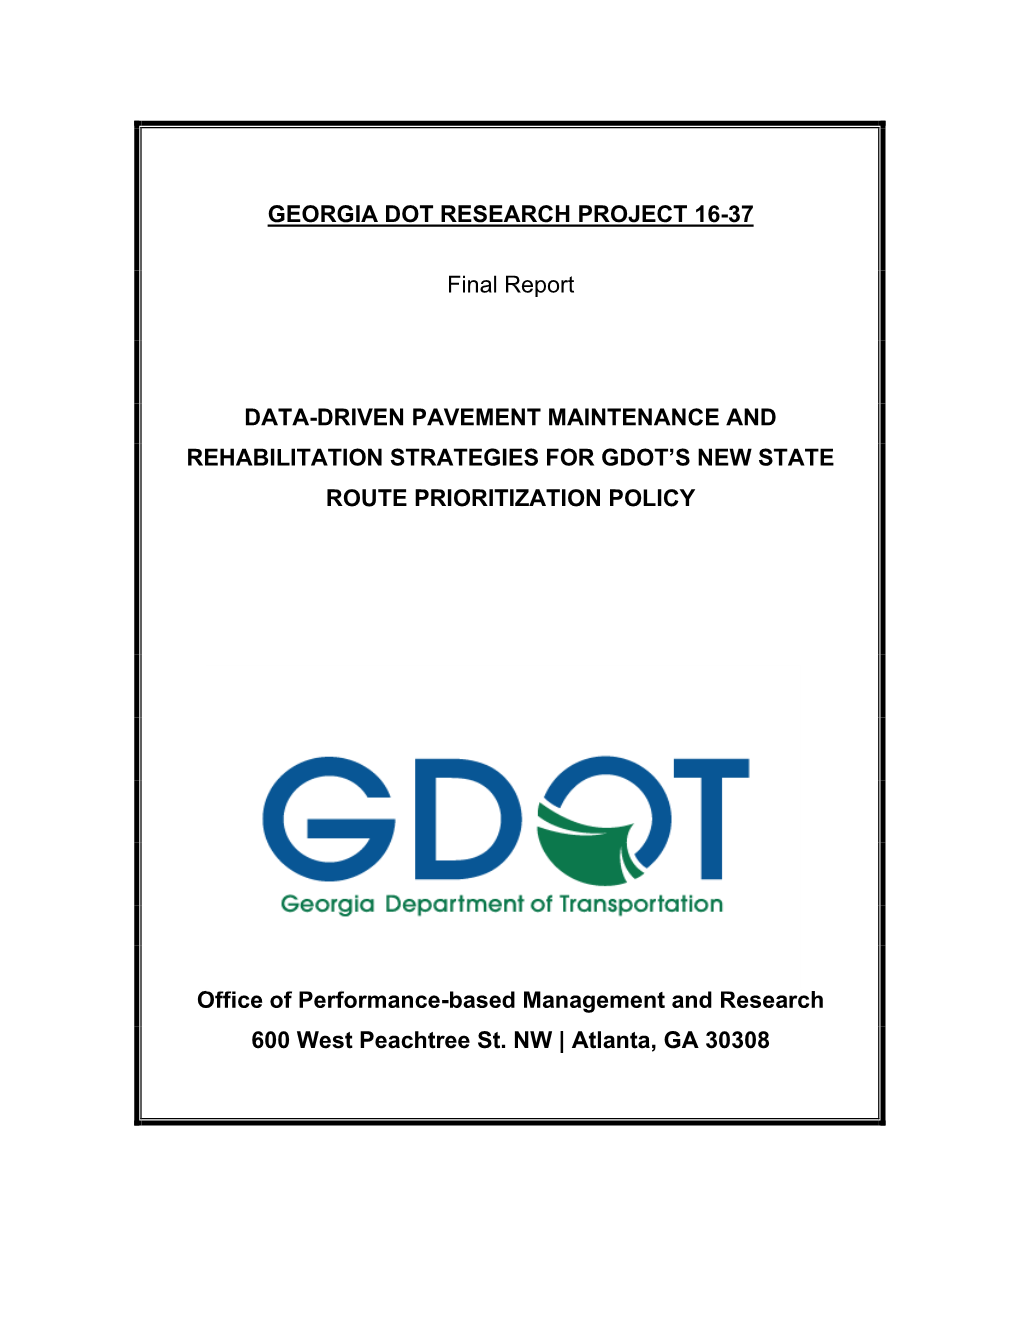 Data-Driven Pavement Maintenance and Rehabilitation Strategies for GDOT's New State Route Prioritization Policy